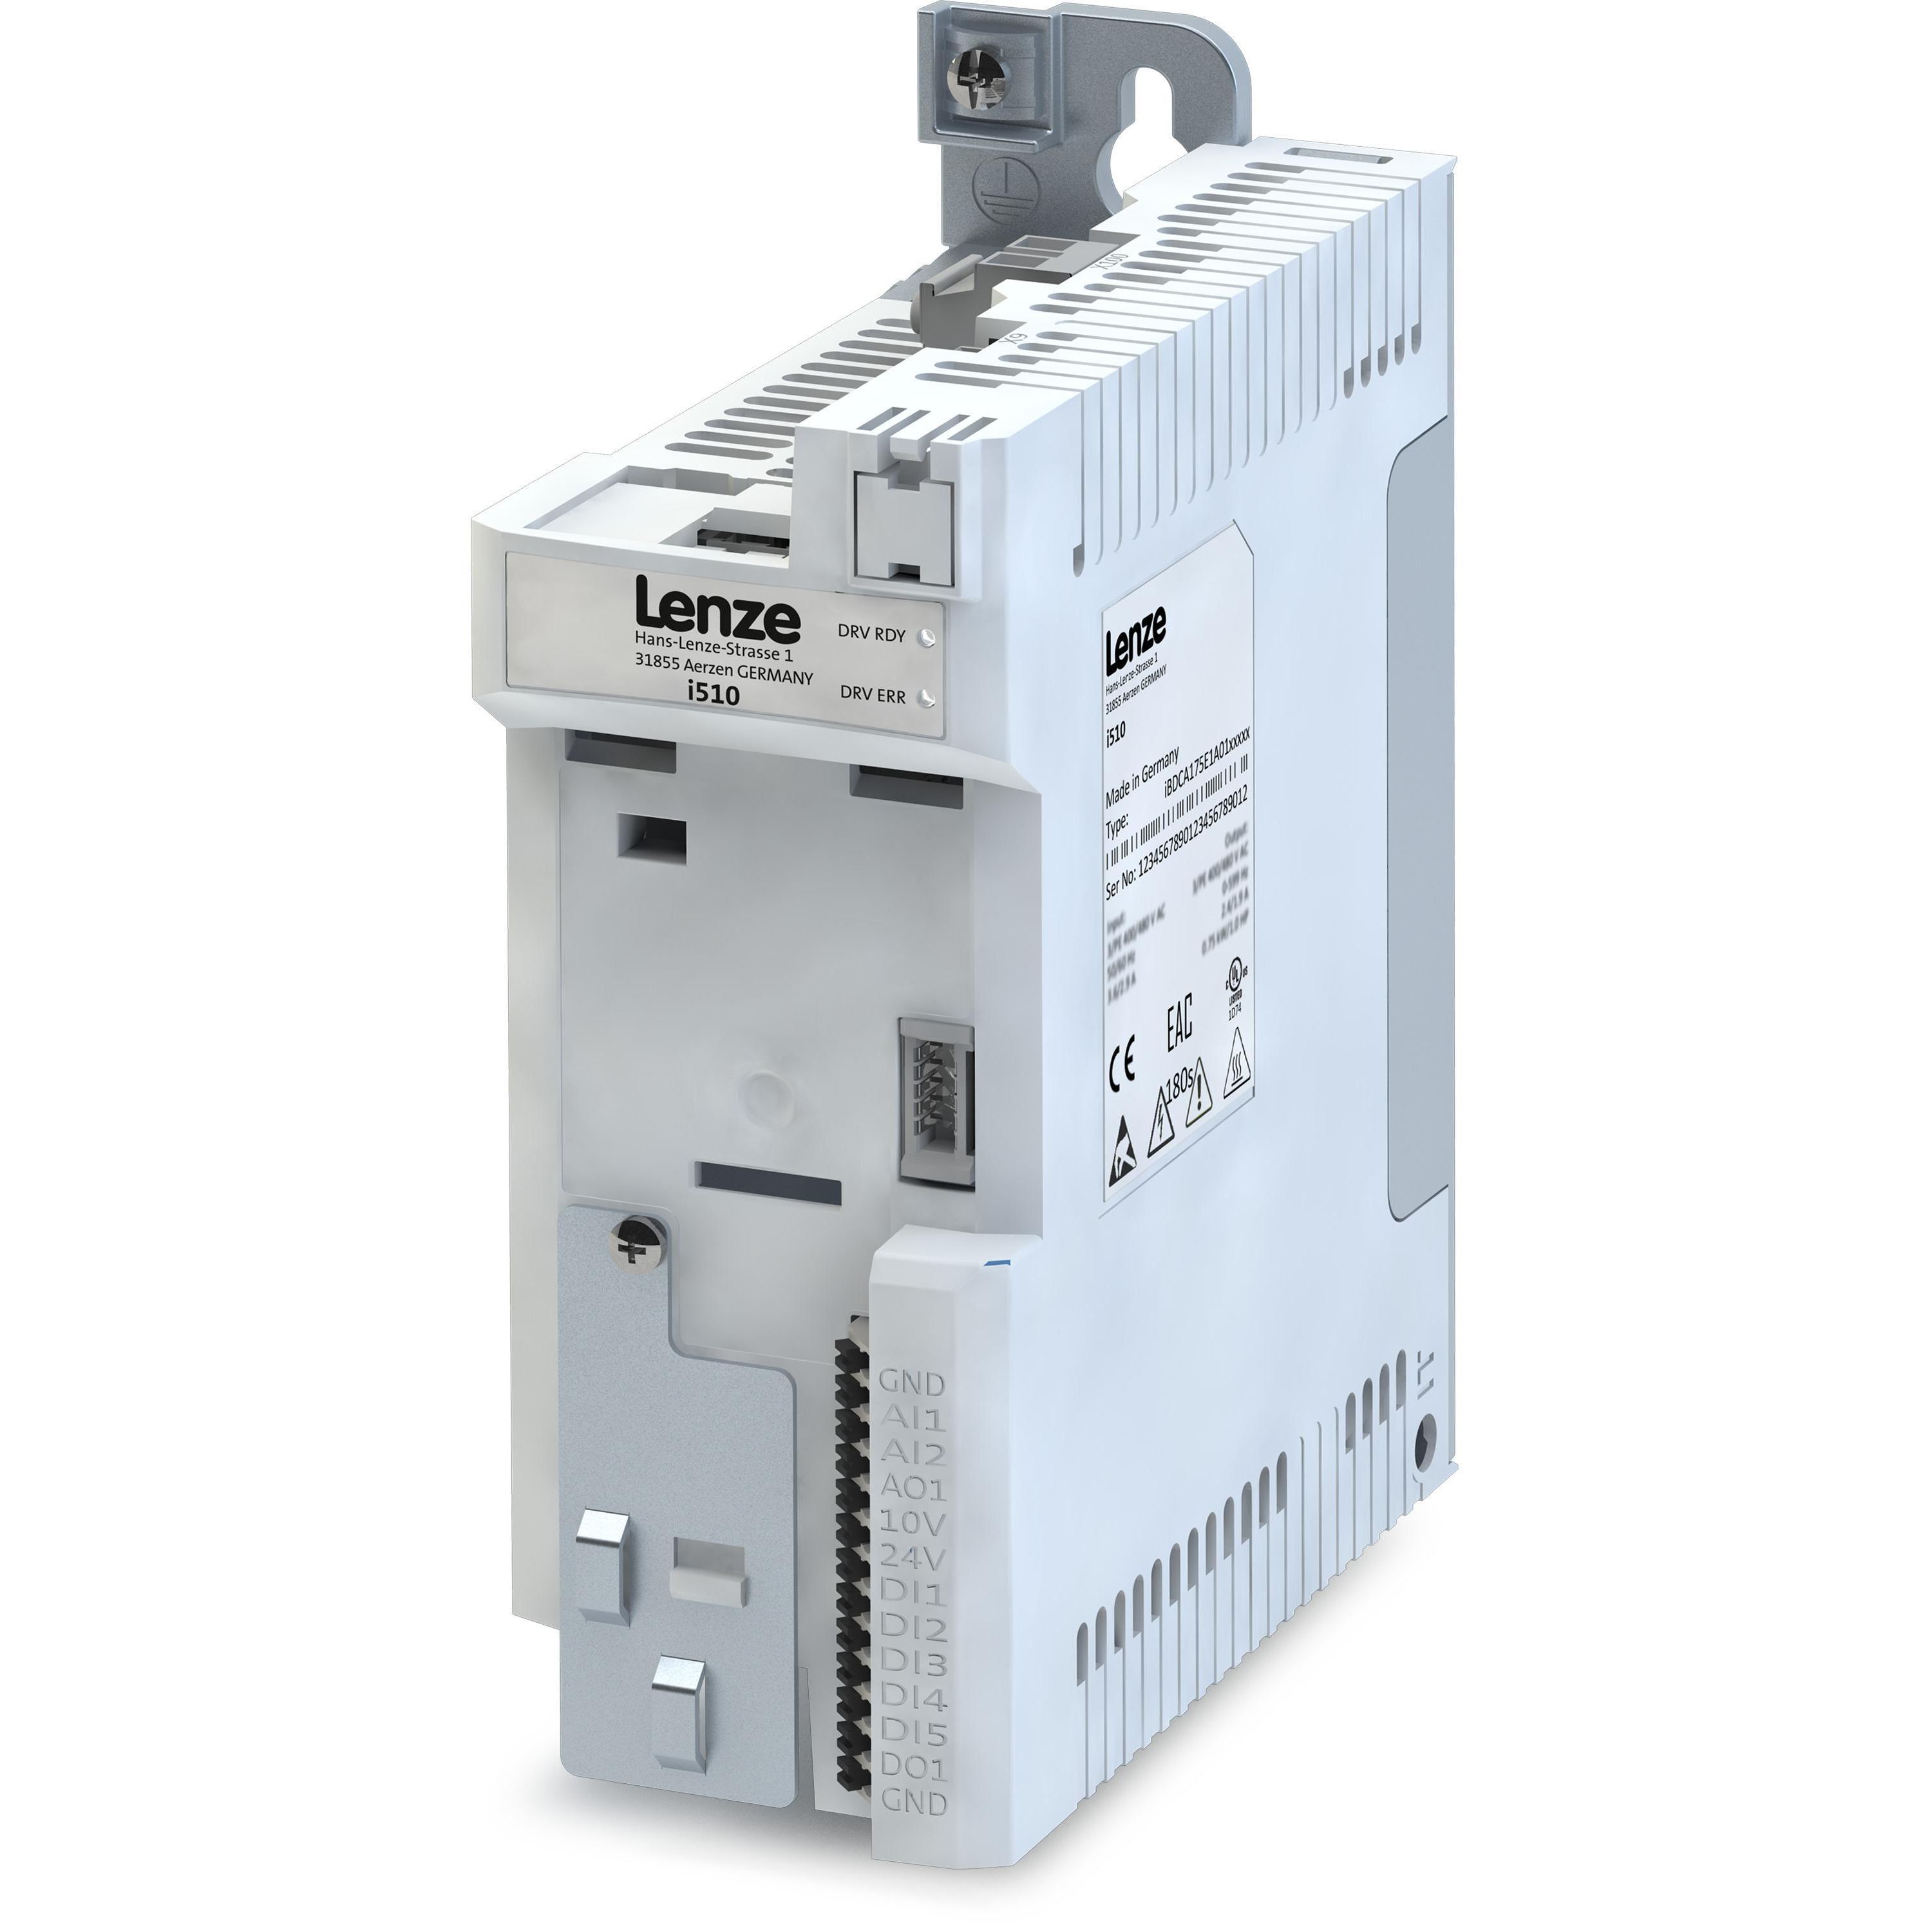 Frequency Inverter I510-c 230240 V By Lenze 16129110 Misumi Online Shop - Select Configure Order